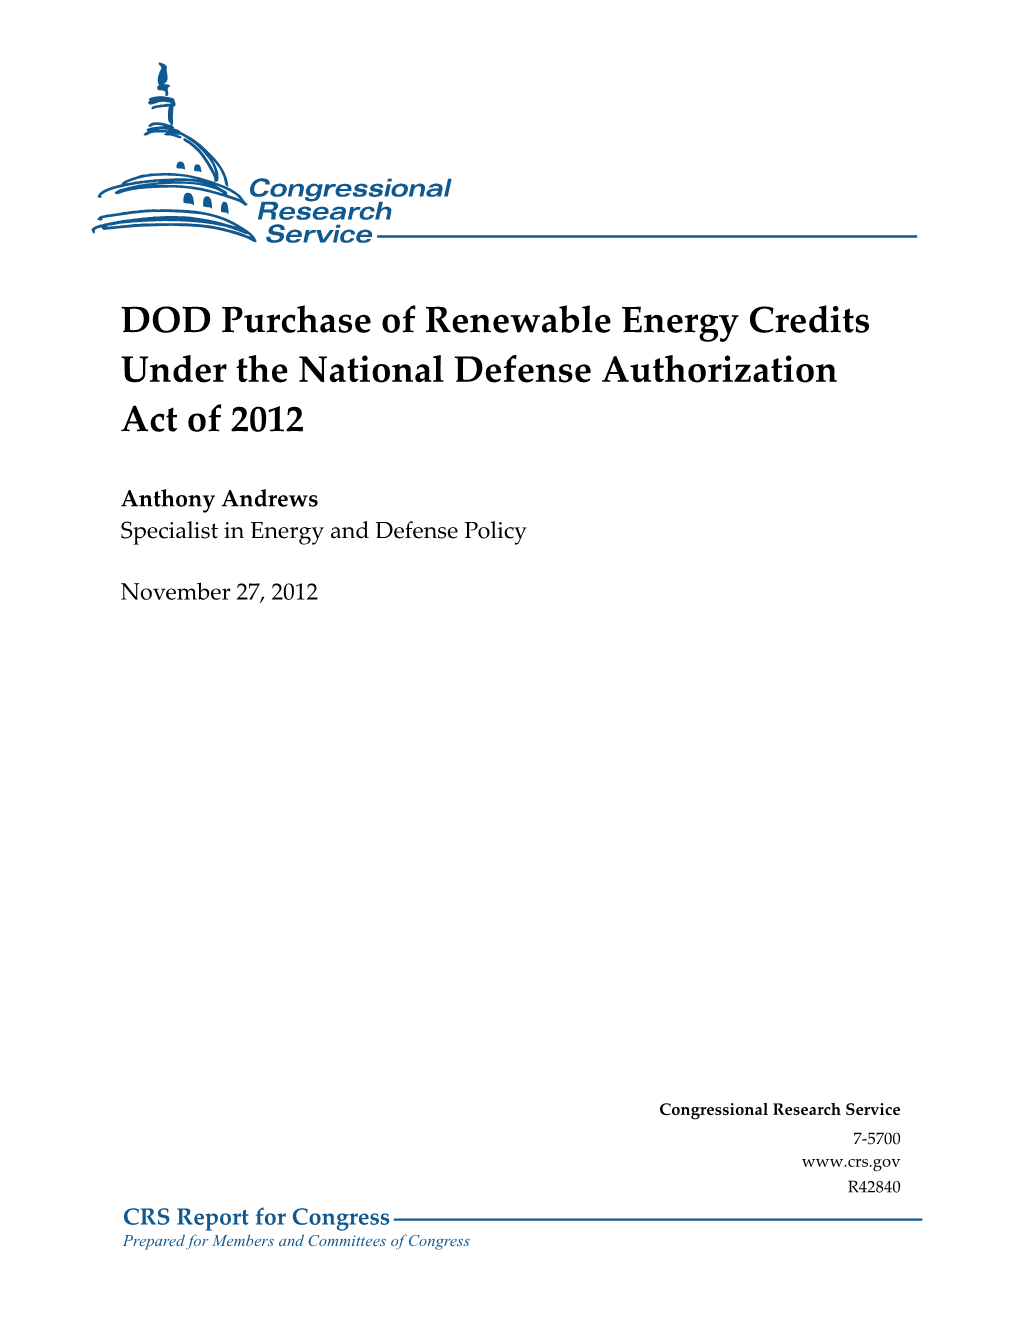 DOD Purchase of Renewable Energy Credits Under the National Defense Authorization Act of 2012